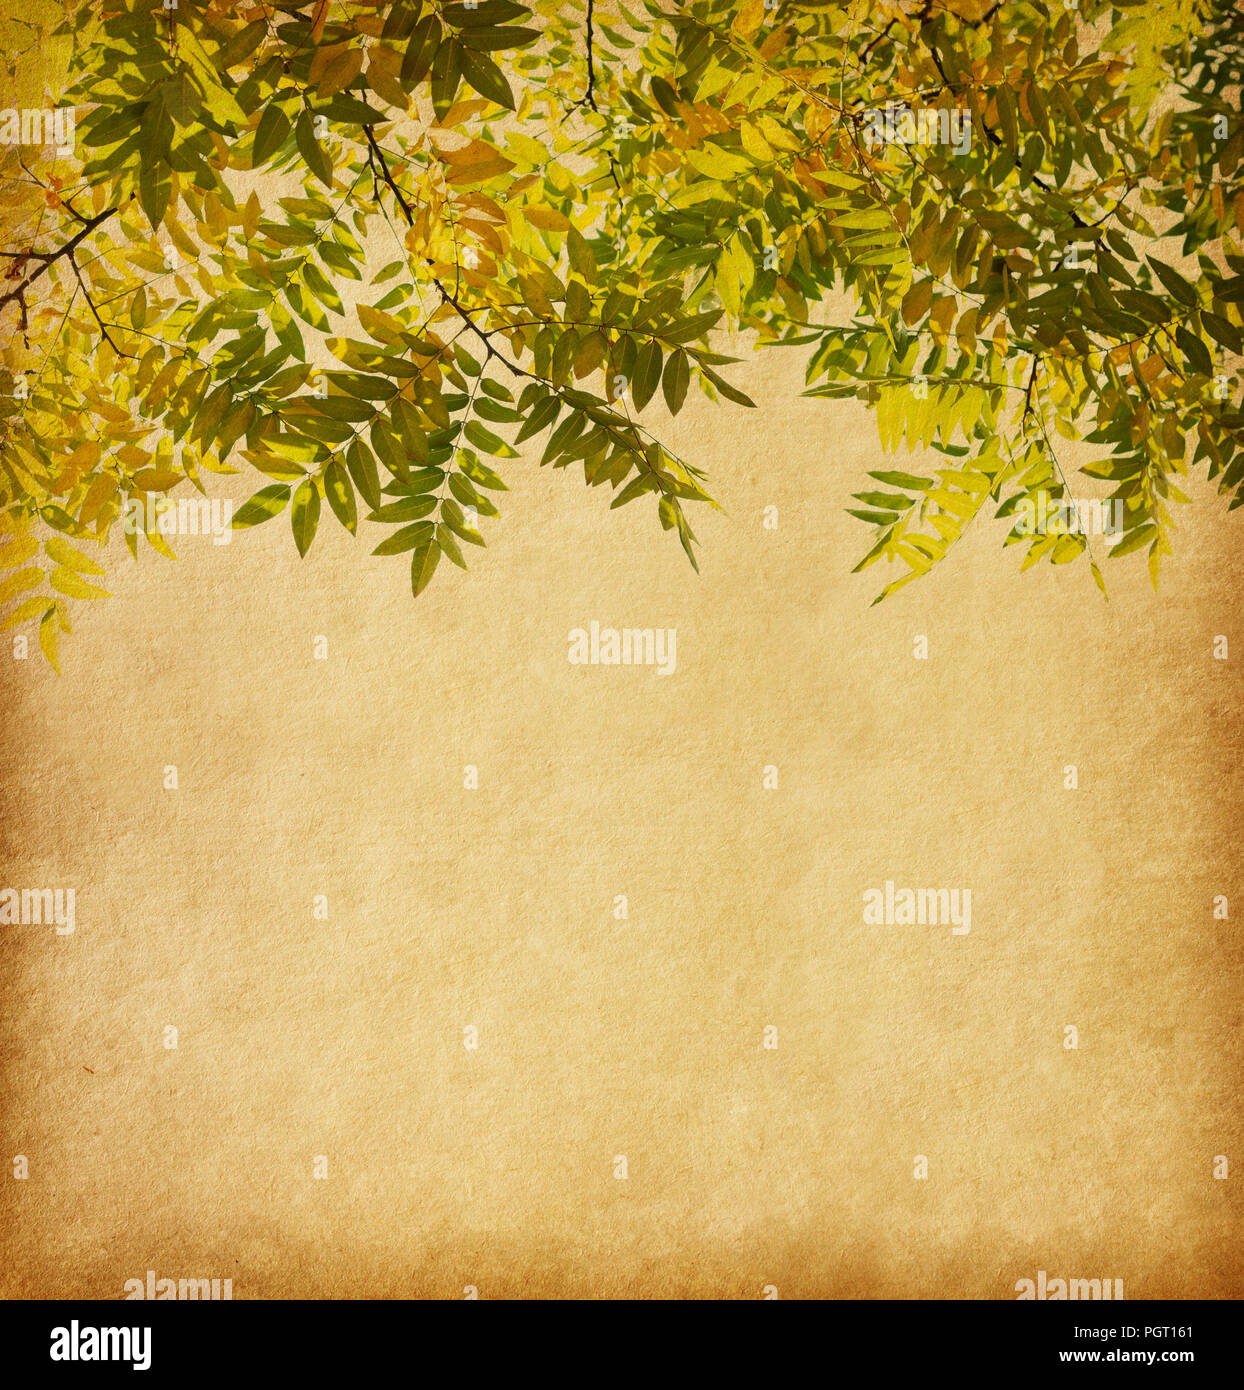 Aged paper texture with  branch of autumn leaves. Pagoda Tree Stock Photo